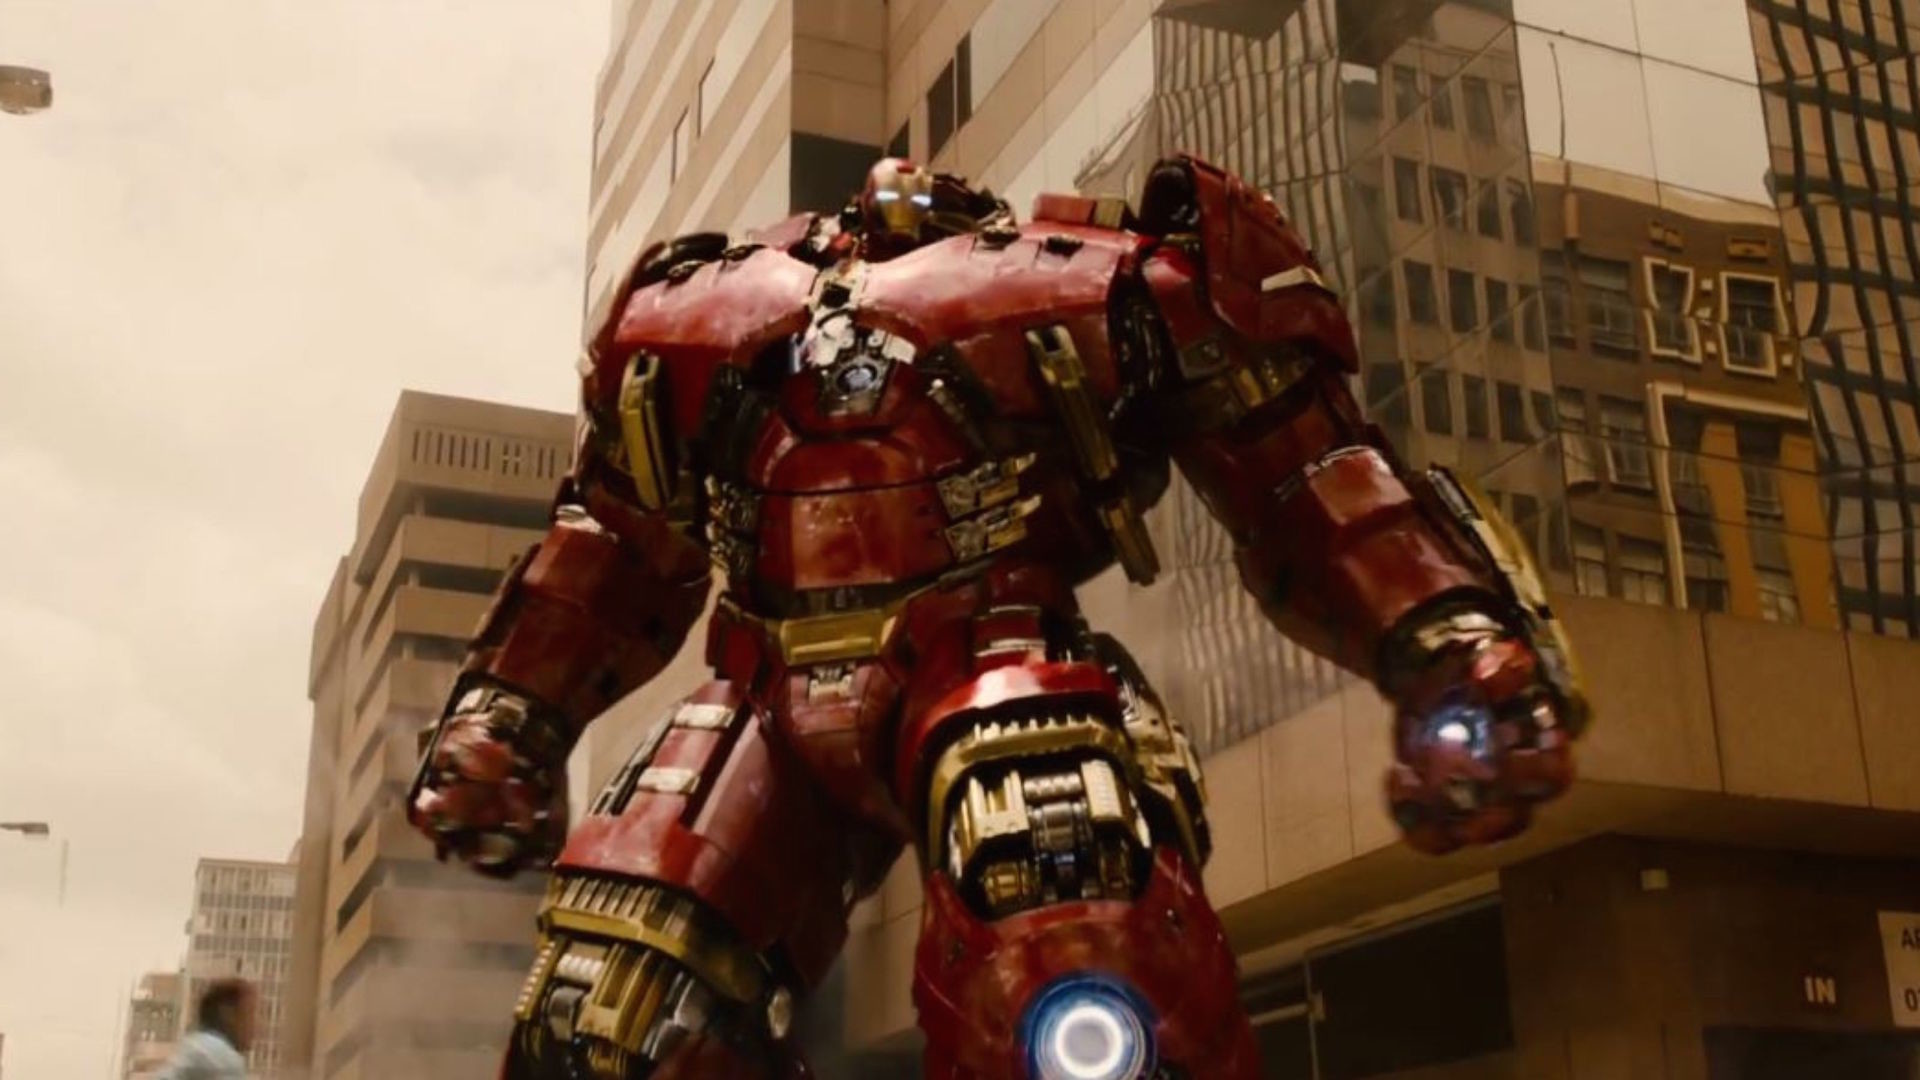 1920x1080 Making of Featurette for the Hulkbuster Funko Pop Figure